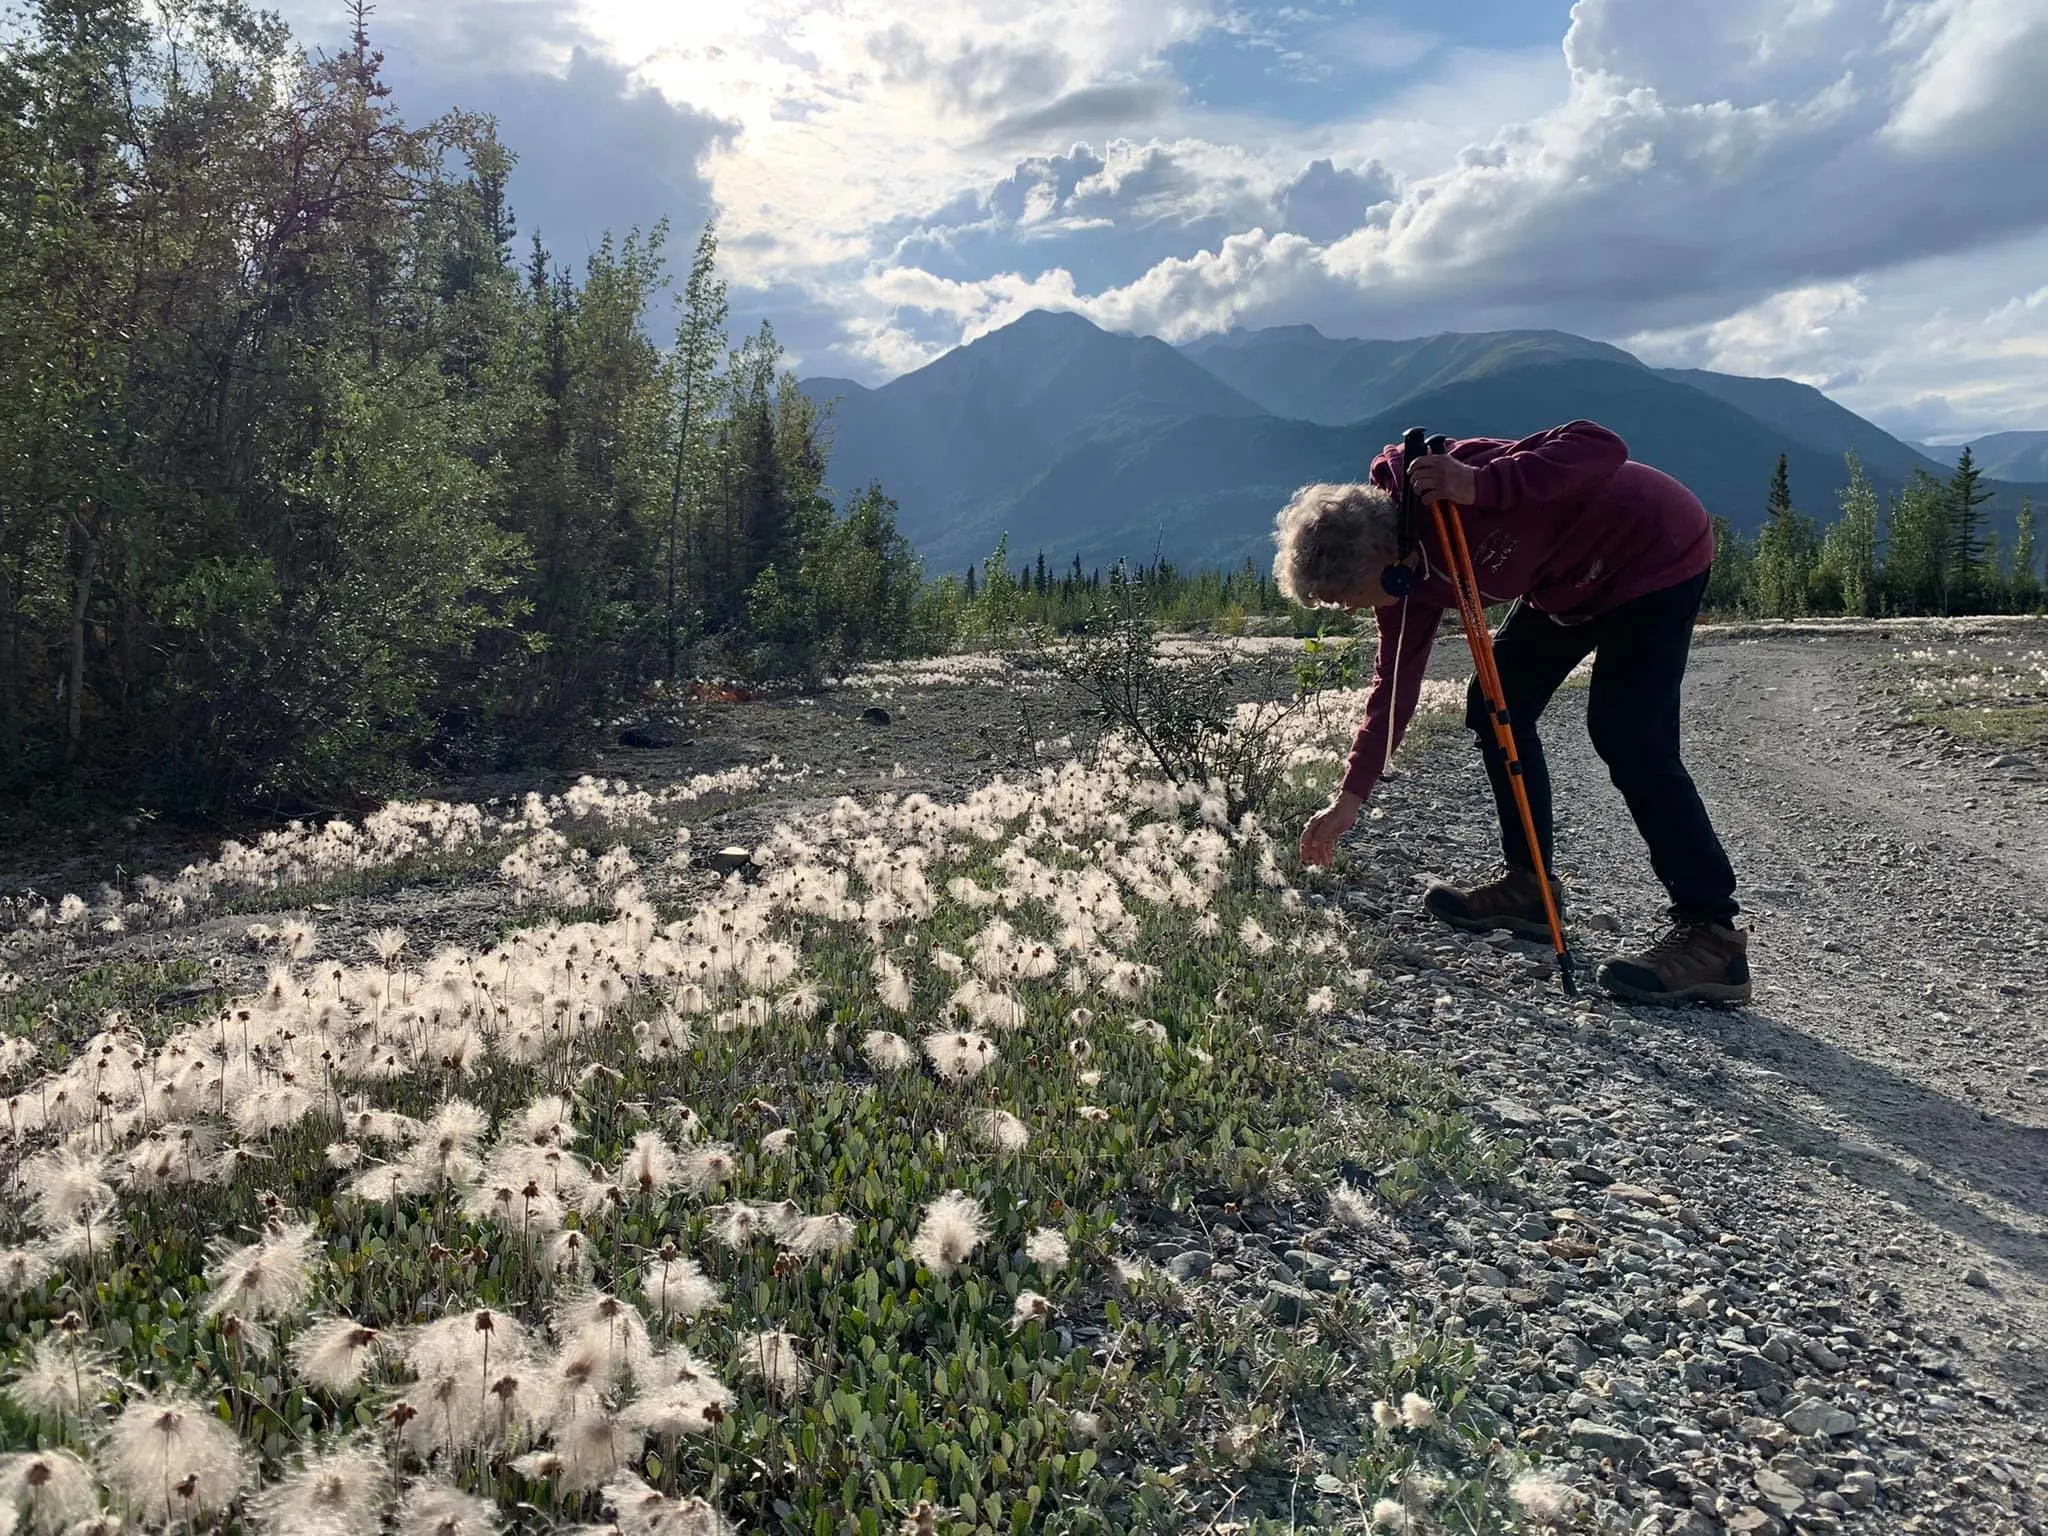 Joy stops to pick flowers while hiking through Wrangell-St. Elias National Park and Preserve